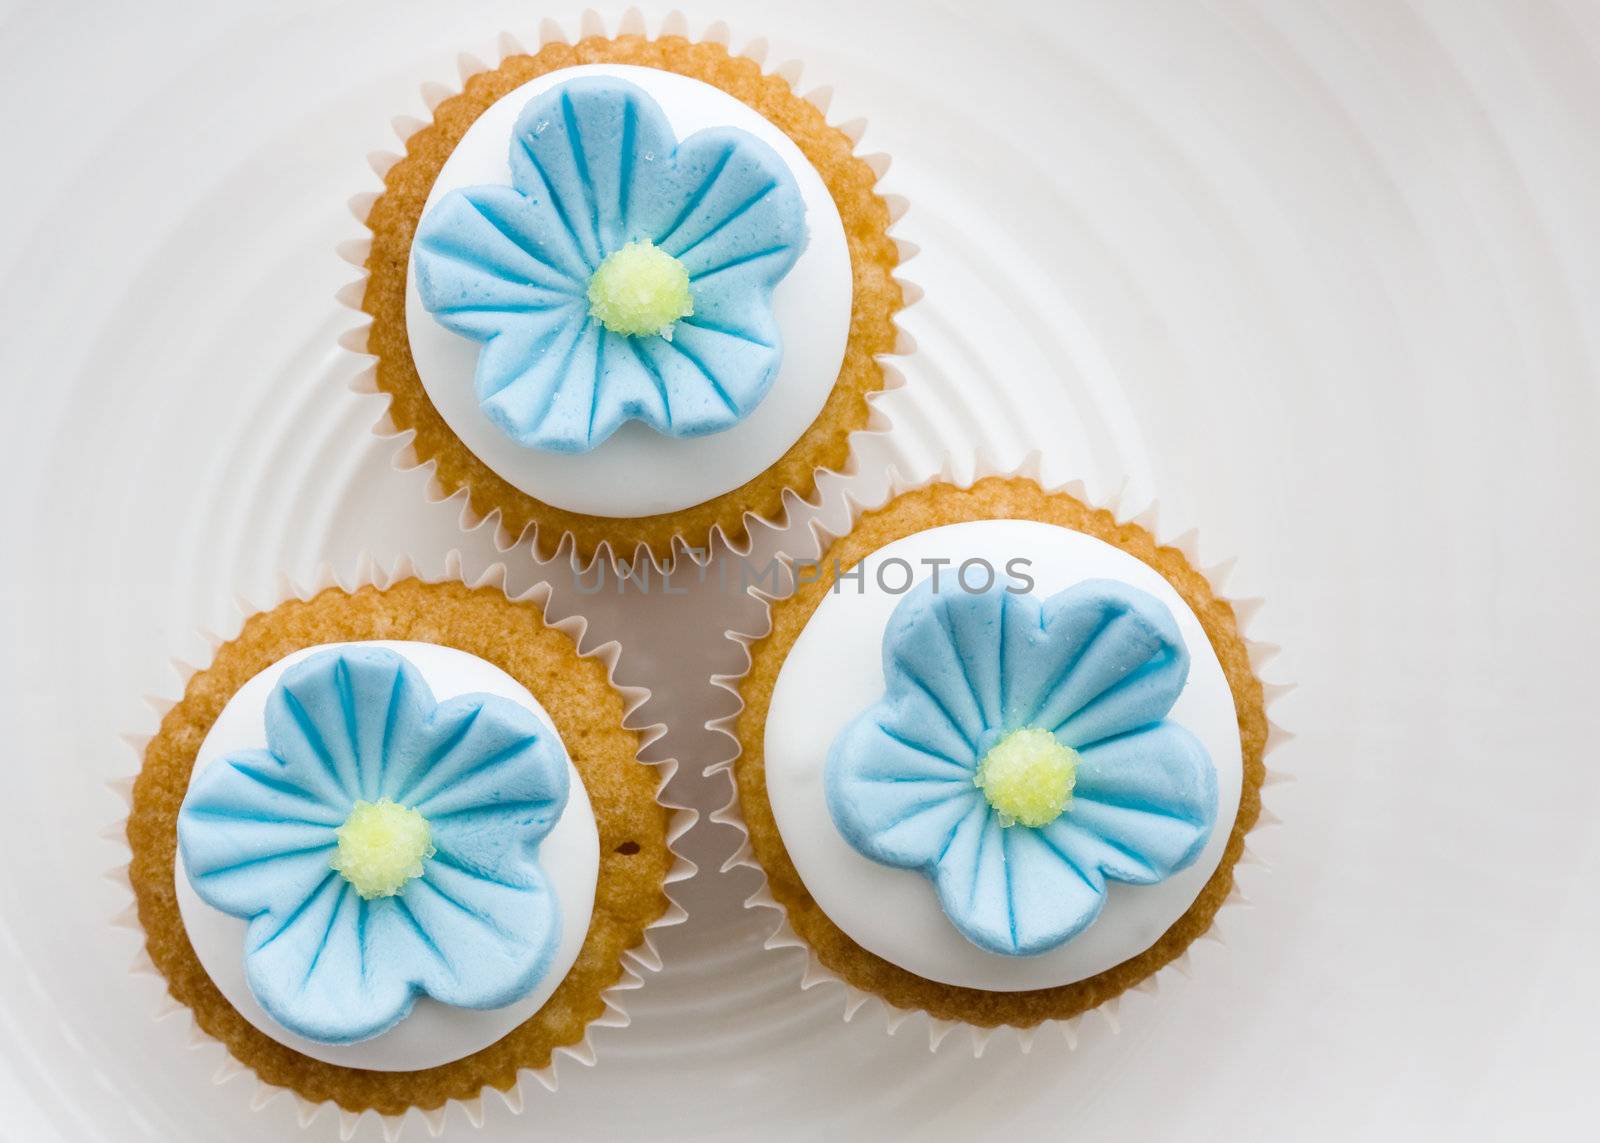 Three cupcakes decorated with blue sugar flowers